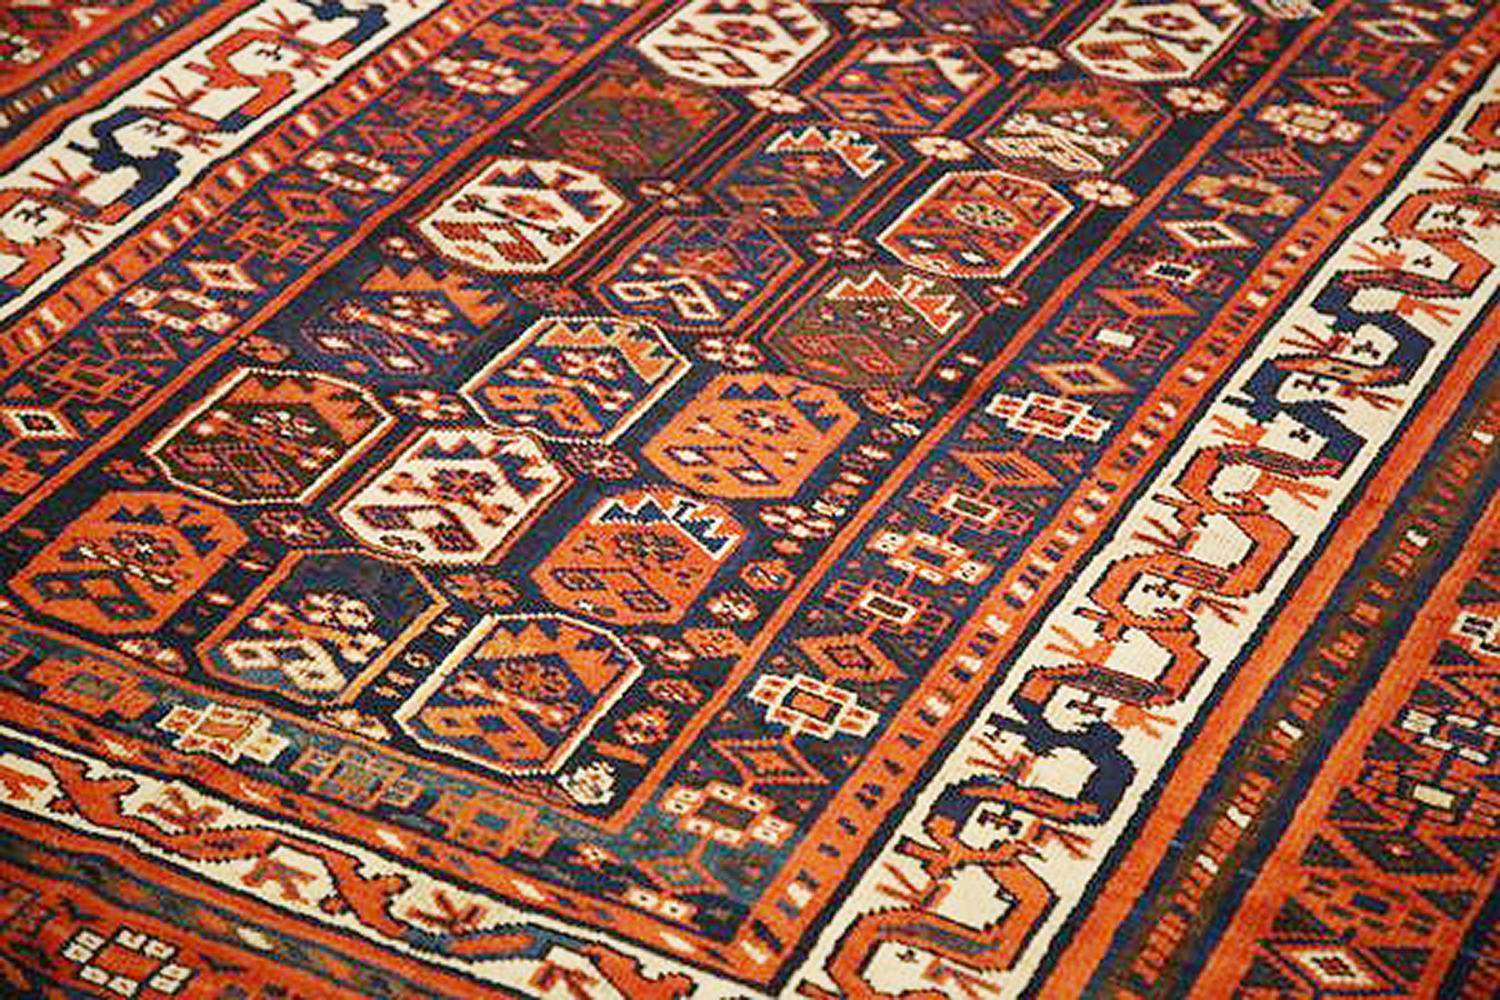 Islamic Antique Persian Shiraz Rug with Ivory and Navy Geometric Details on Rust Field For Sale